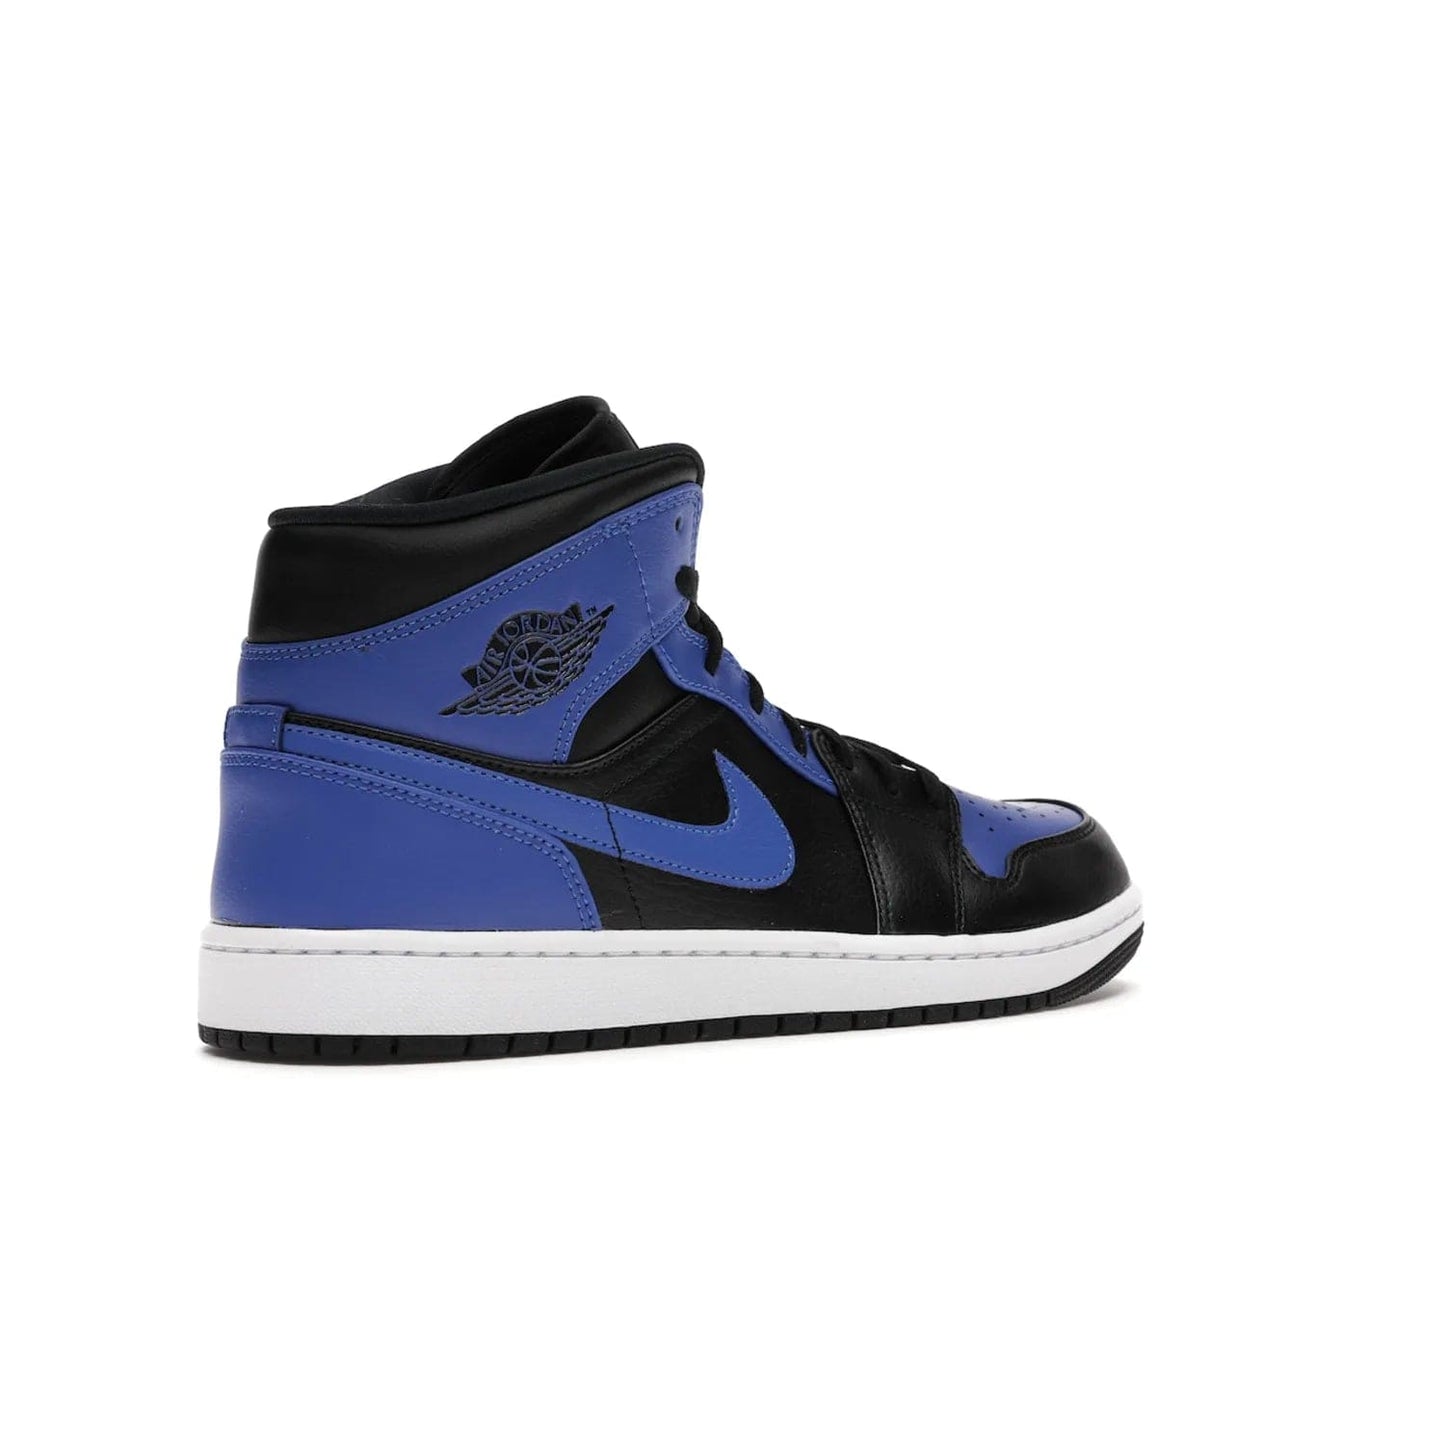 Jordan 1 Mid Hyper Royal Tumbled Leather - Image 33 - Only at www.BallersClubKickz.com - Iconic colorway of the Air Jordan 1 Mid Black Royal Tumbled Leather. Features a black tumbled leather upper, royal blue leather overlays, white midsole & black rubber outsole. Released December 2020. Adds premium style to any collection.